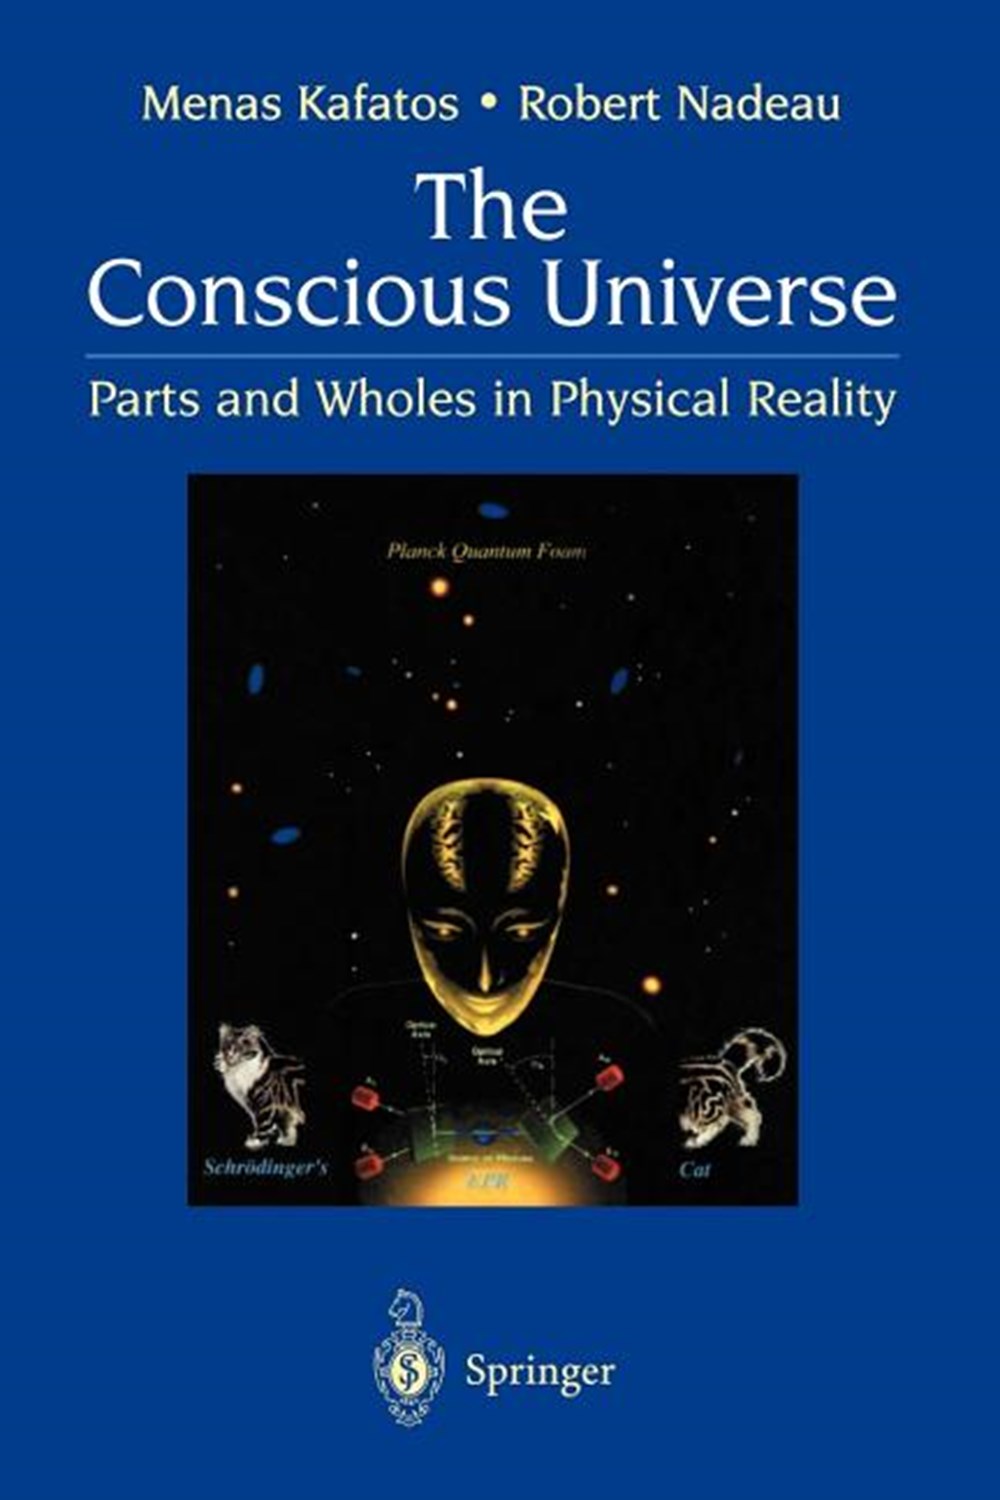 Conscious Universe: Parts and Wholes in Physical Reality